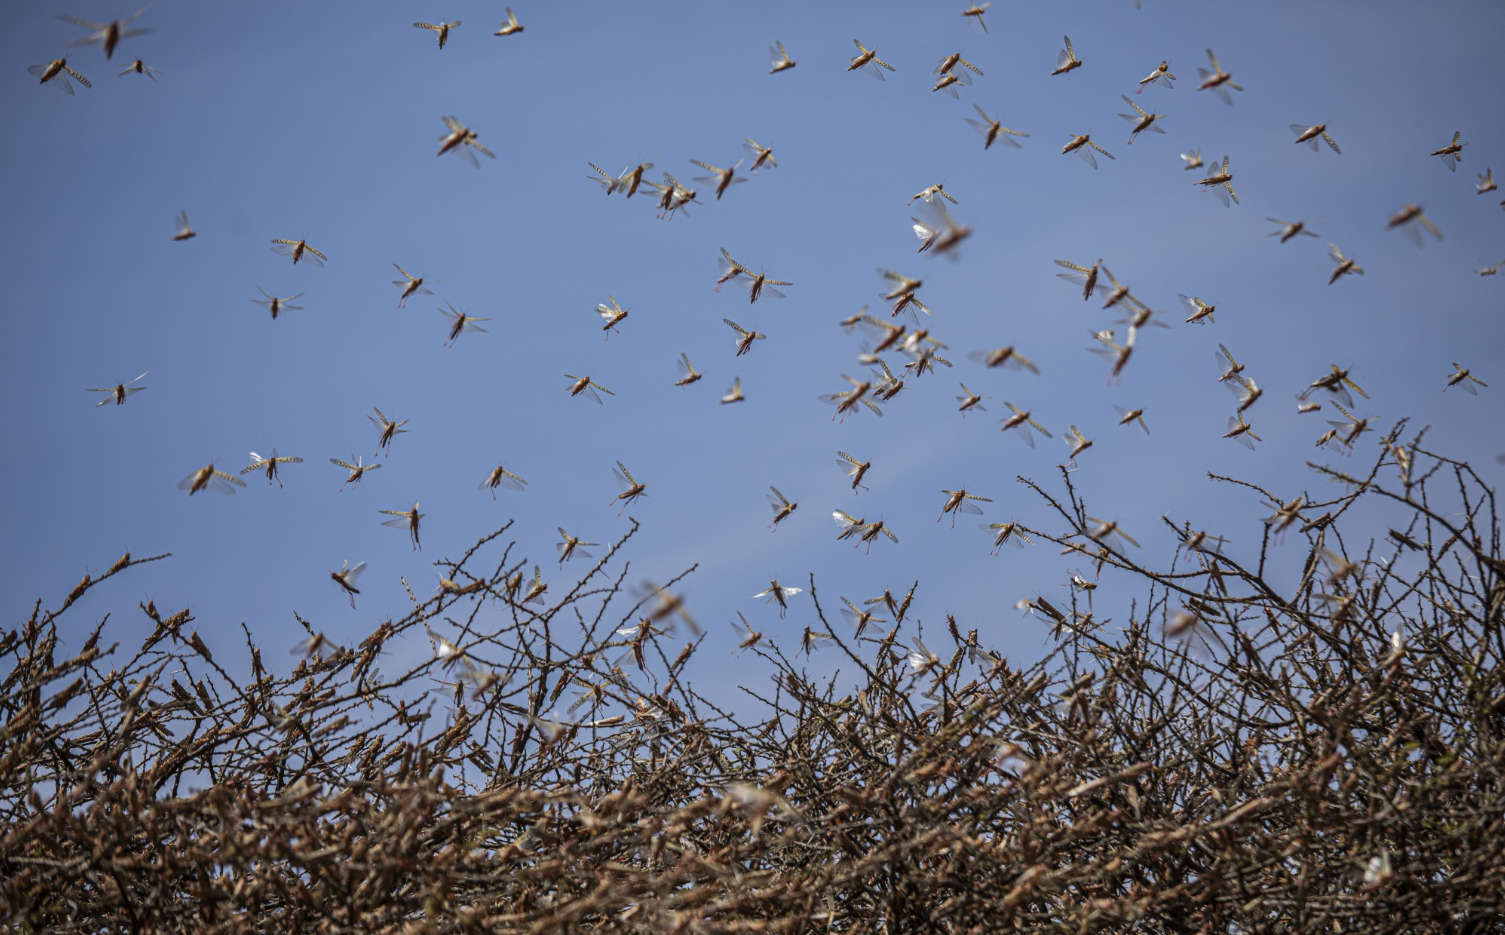 A swarm of desert locusts flies over an acacia tree in a remote part of Somalia. Image by Will Swanson / For The Times. ​​​​​​​Somalia, 2020.